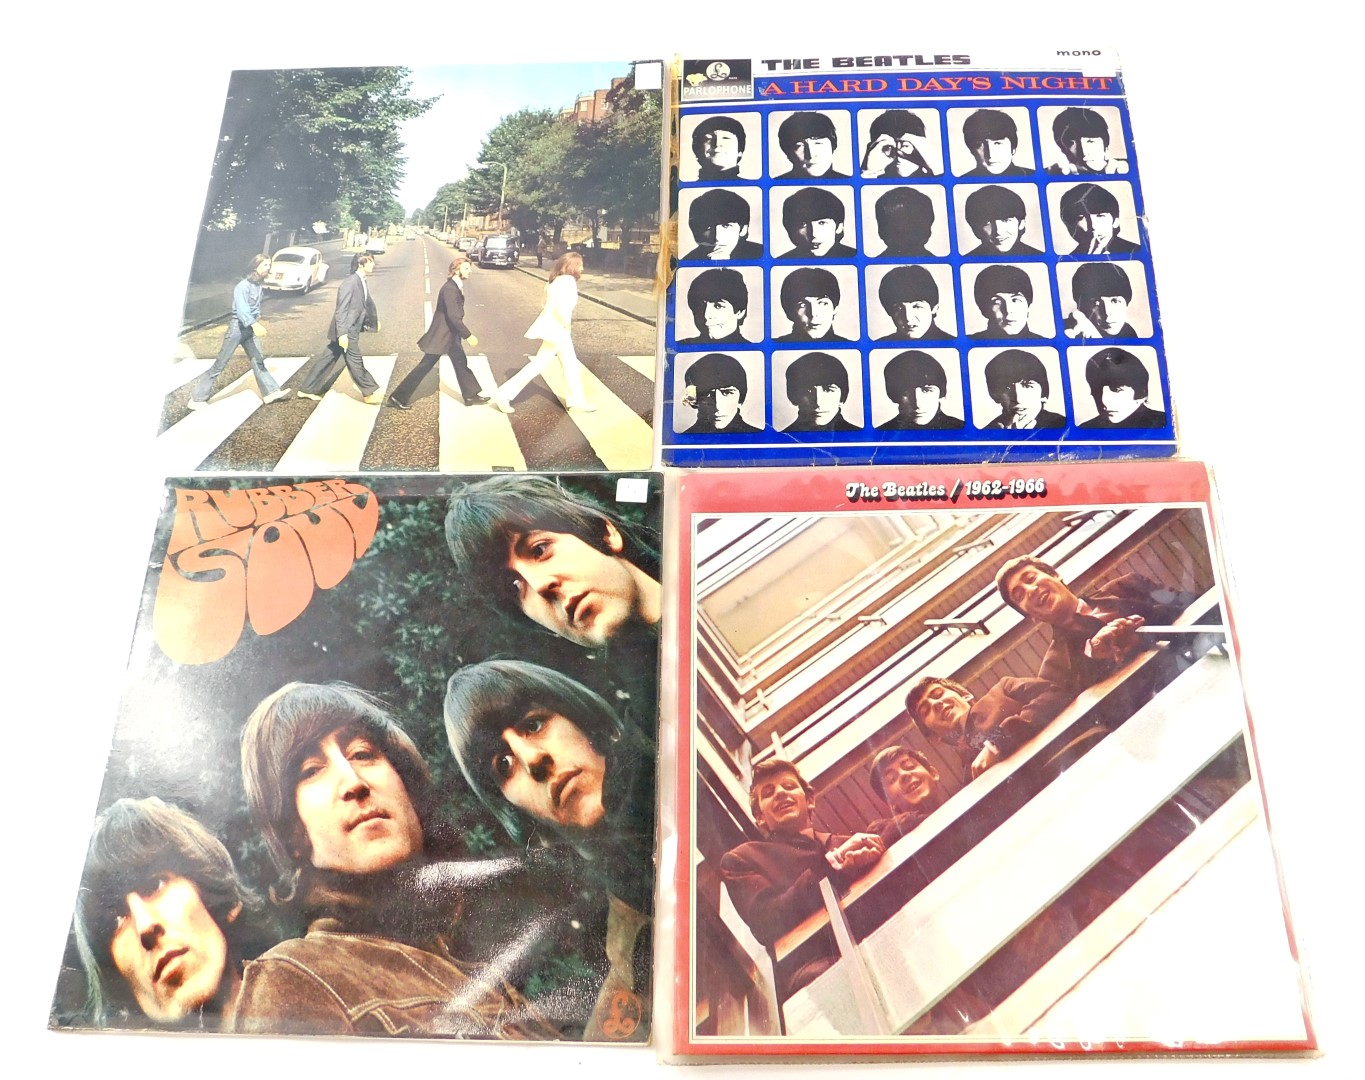 Four Beatles records, comprising The Beatles 1962-1966, Rubber Soul, Abbey Road, and Hard Days Night